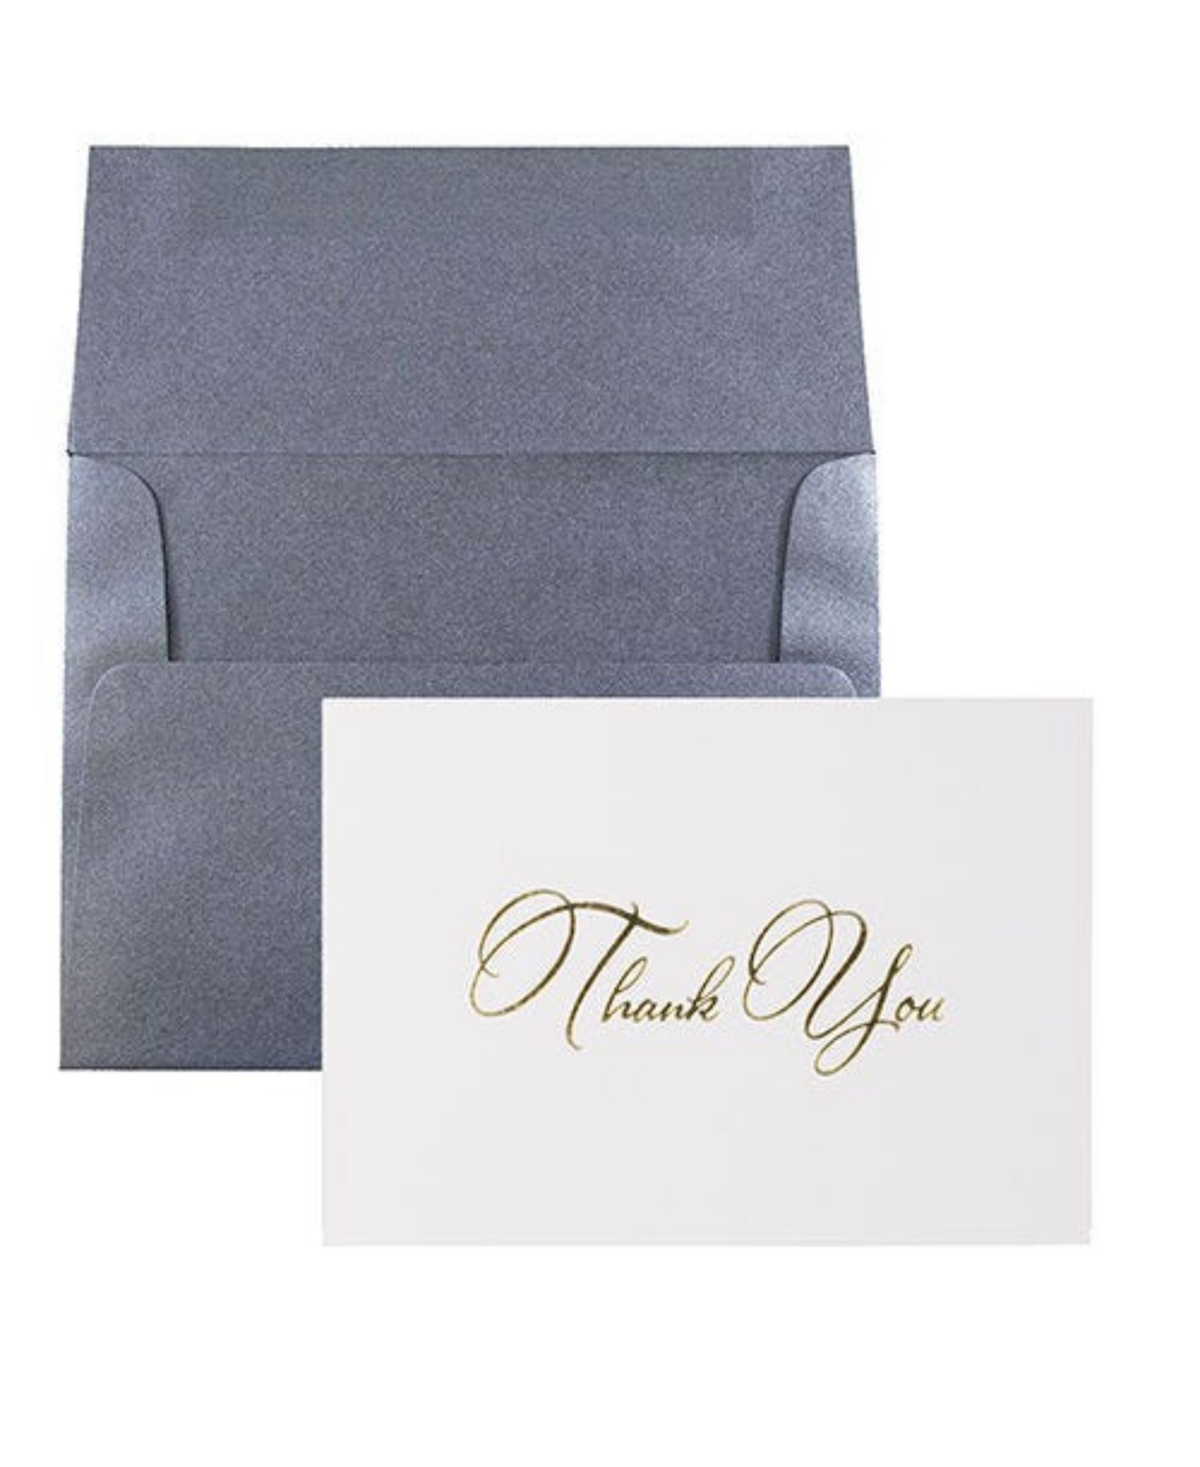 Jam Paper Thank You Card Sets In Gold Script Cards Anthracite Envelopes